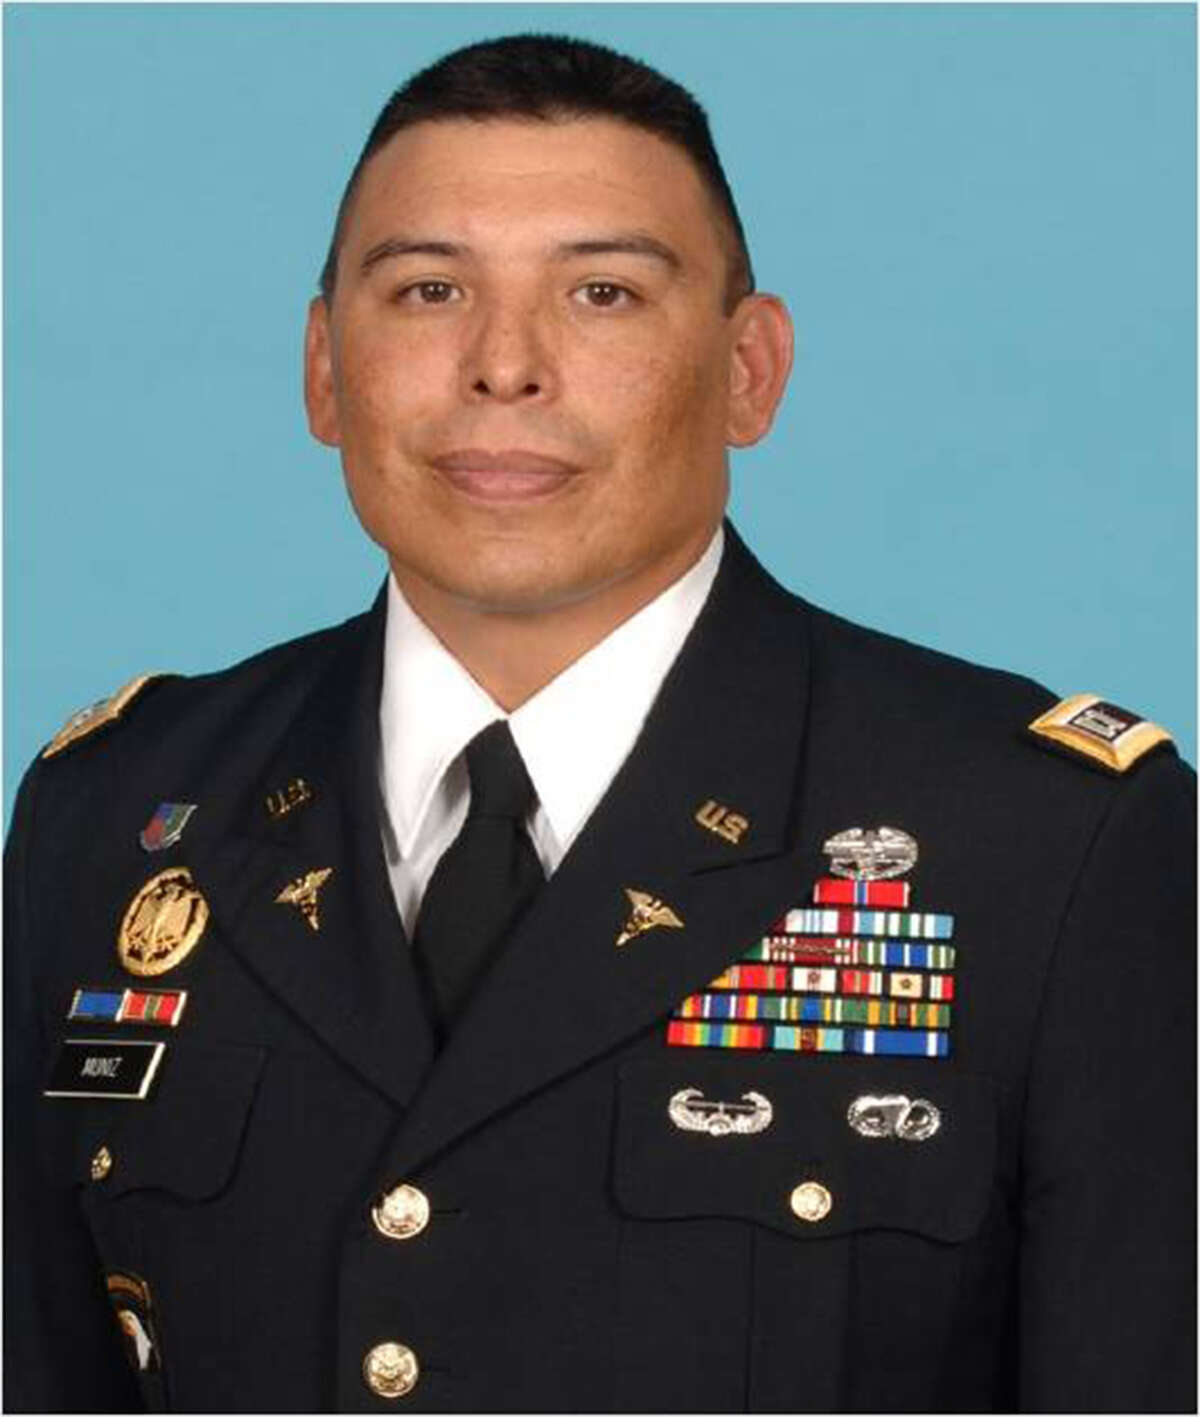 Cpt. Jonathan Nyle Muniz, 42, died Jan. 8 from an apparent gunshot wound in Killeen. Bell County Justice of the Peace Garland Potvin pronounced him deceased at 7 p.m. the same day. Muniz, whose home of record is listed as Rocky Ford, Colorado, entered active duty service in February 2003. He was commissioned in January 2004 as a 2nd lieutenant in the Army Medical Specialist Corps. He was assigned to Headquarters and Headquarters Company, 1st Air Cavalry Brigade, 1st Cavalry Division, Fort Hood, since January 2012. Muniz deployed in support of Operation Iraqi Freedom from January 2005 to January 2006 and in support of Operation Enduring Freedom from May 2010 to April 2011.